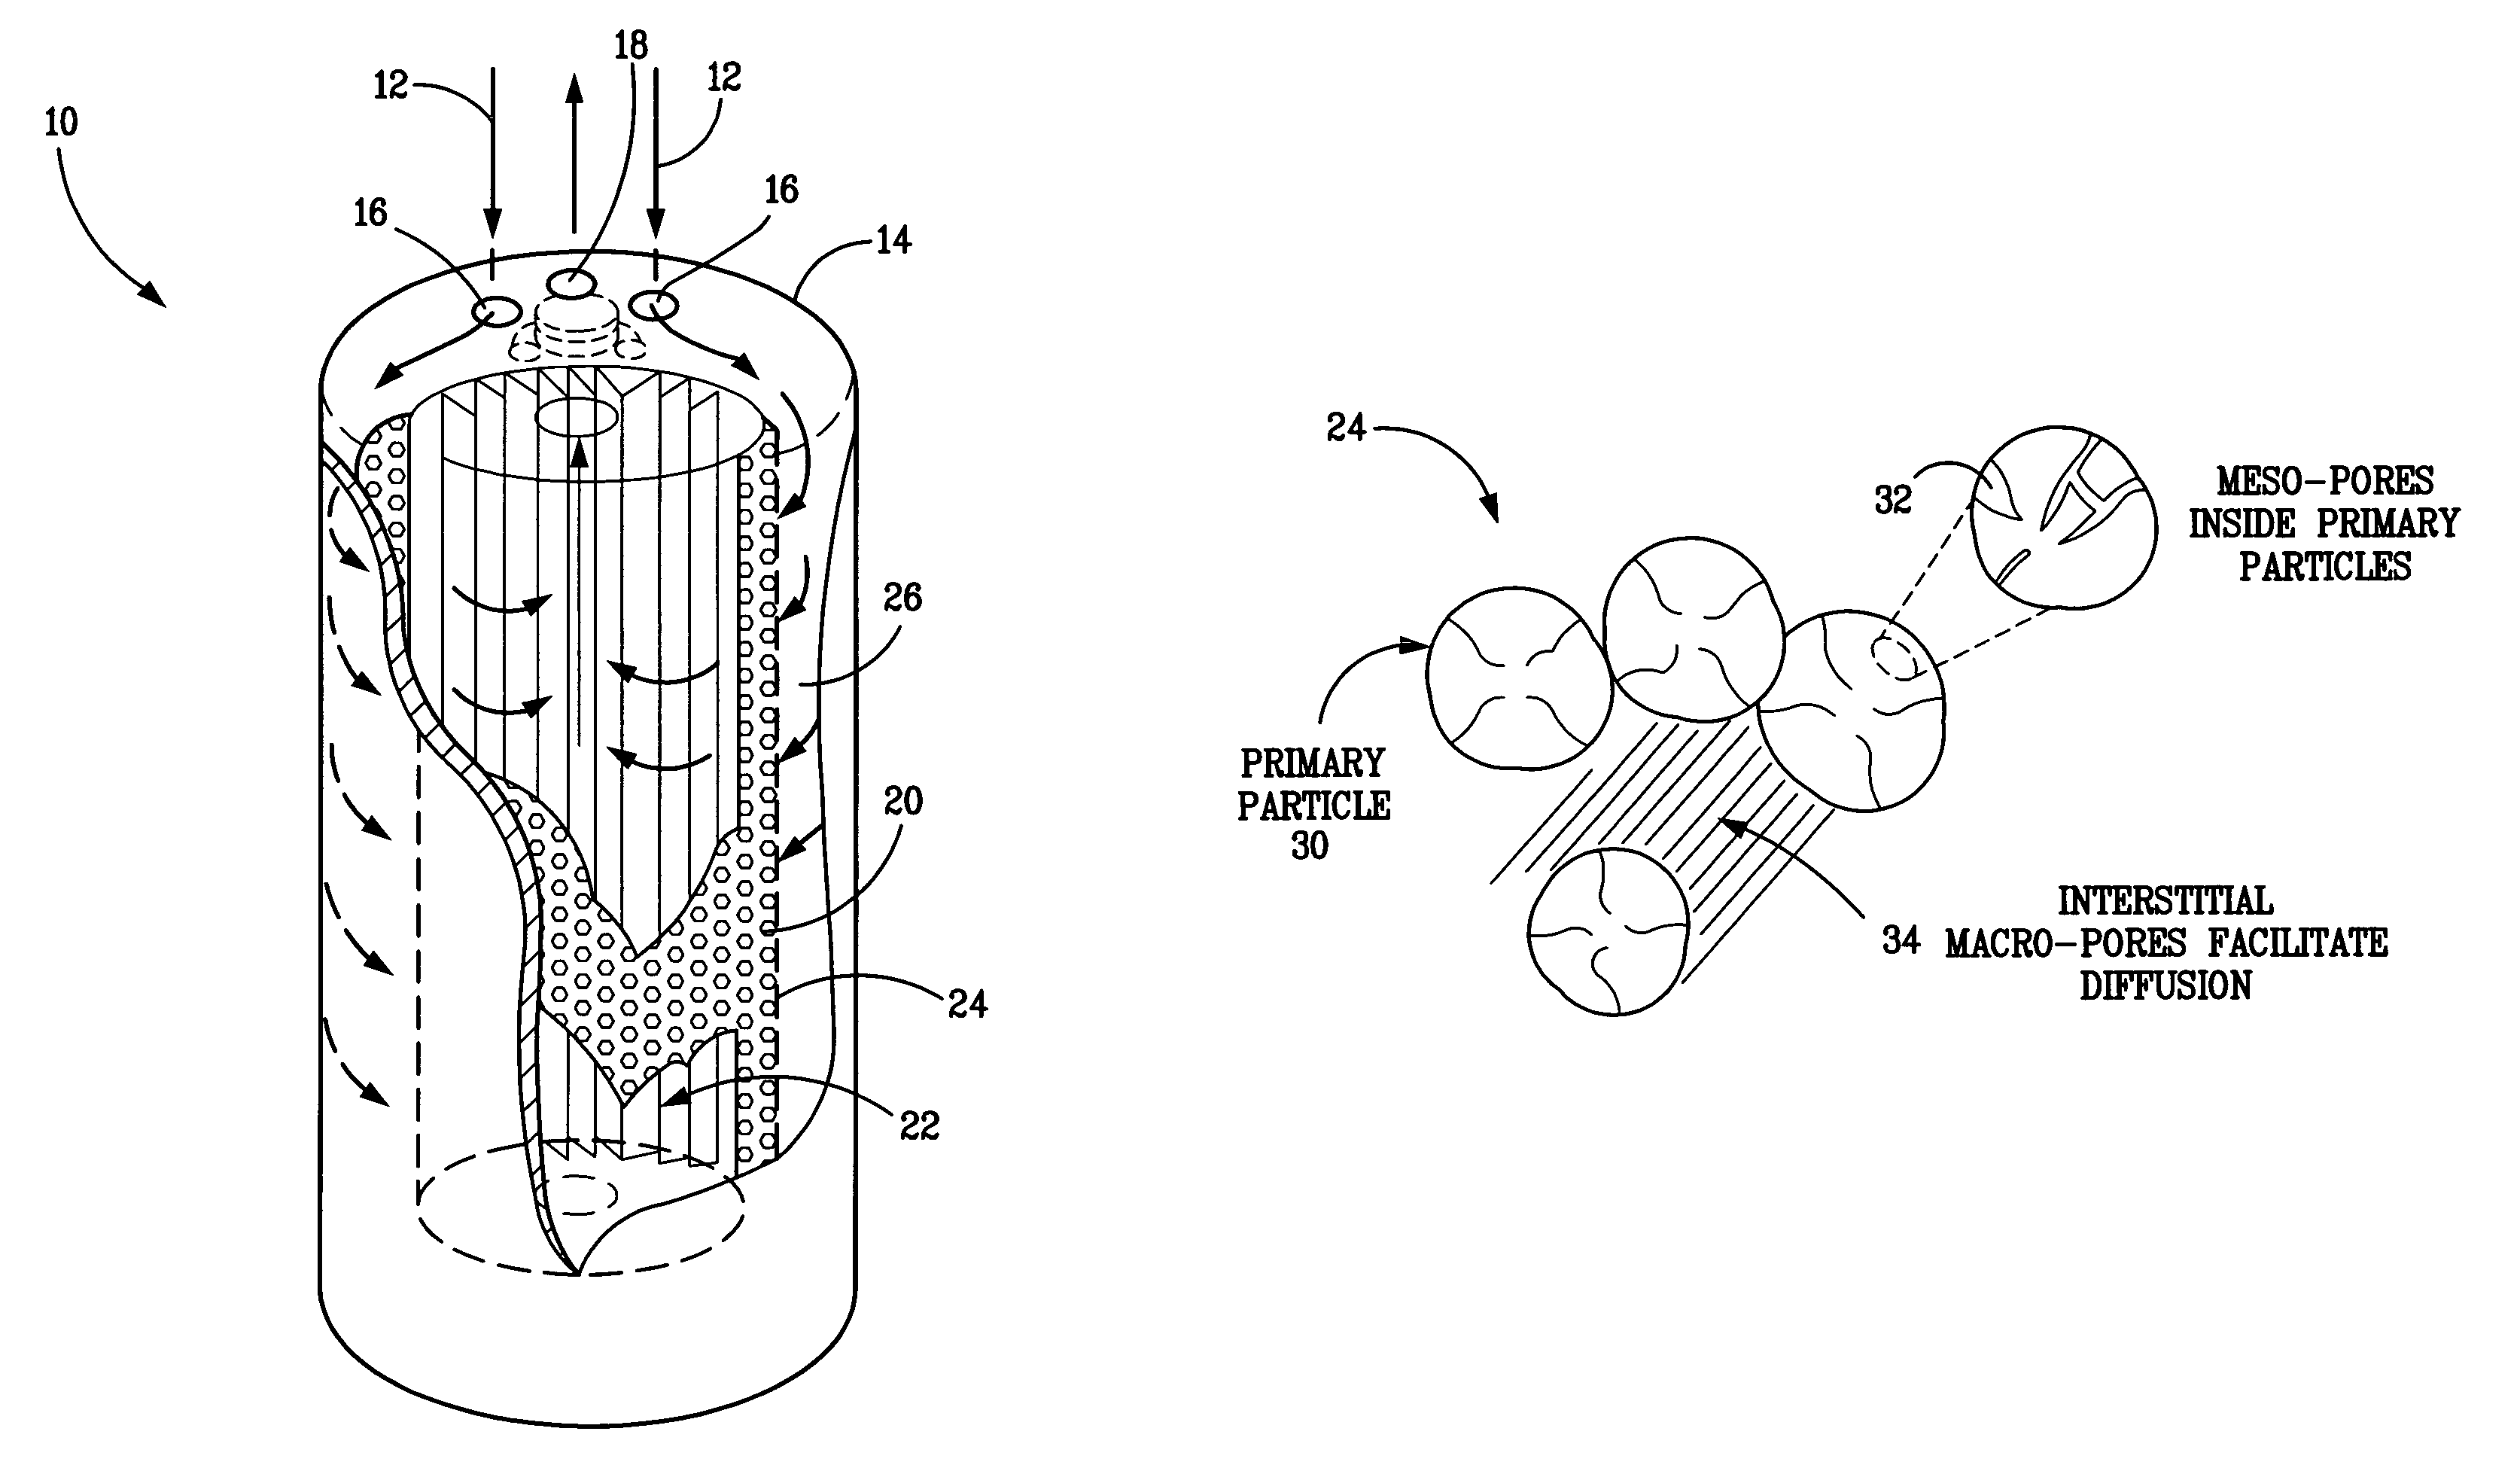 Materials and processes for reducing combustion by-products in a lubrication system for an internal combustion engine